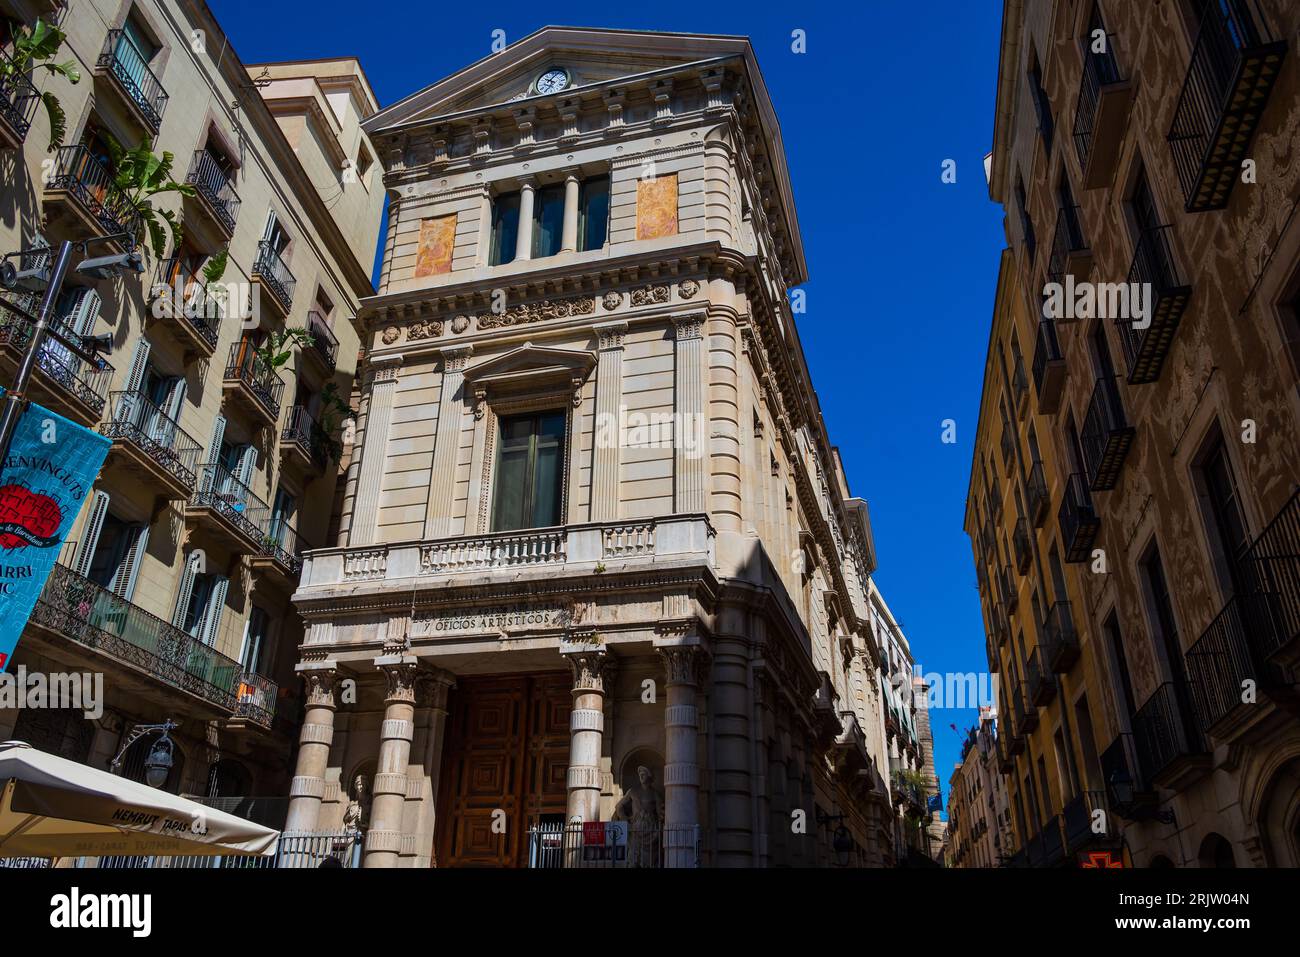 Barcelona, Spain - May 26 2022: Central School of Arts and Crafts Stock Photo